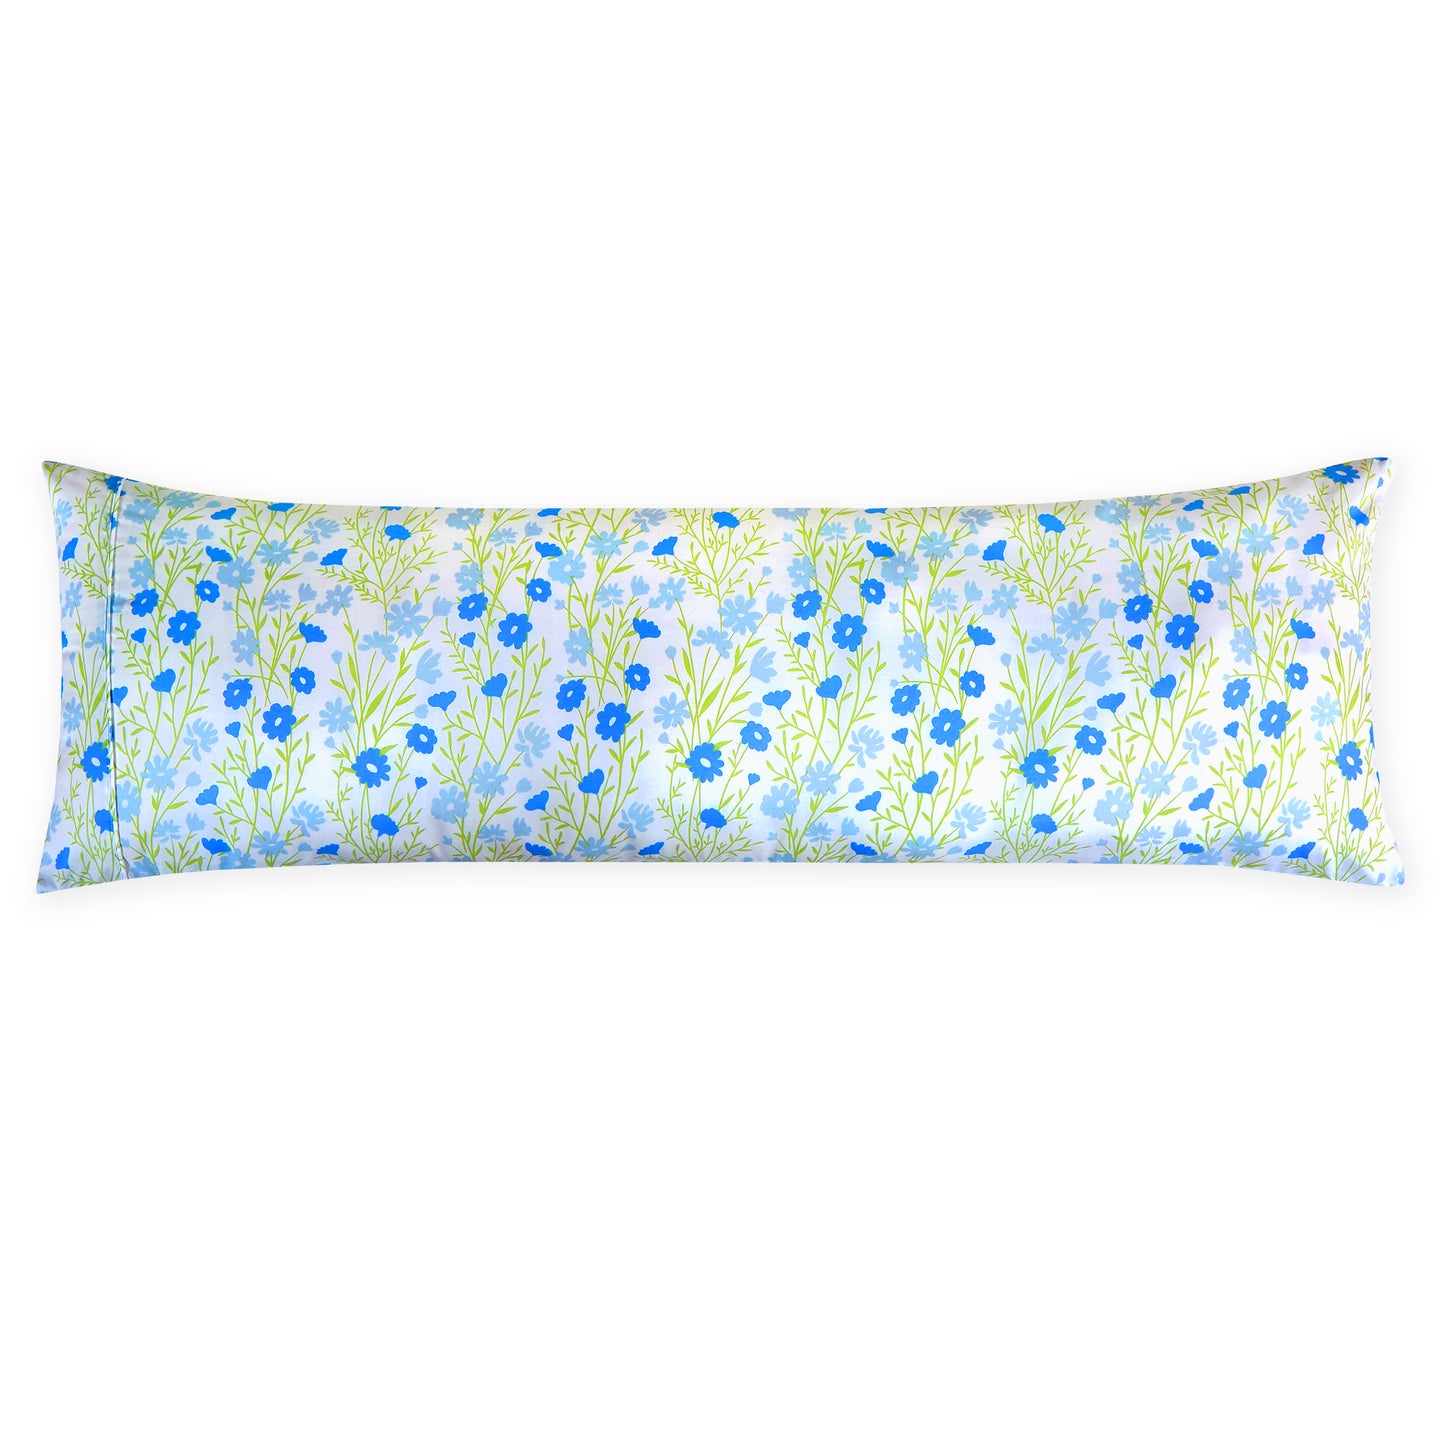 Elegant Comfort Floral and Stripe Pattern Pillowcases